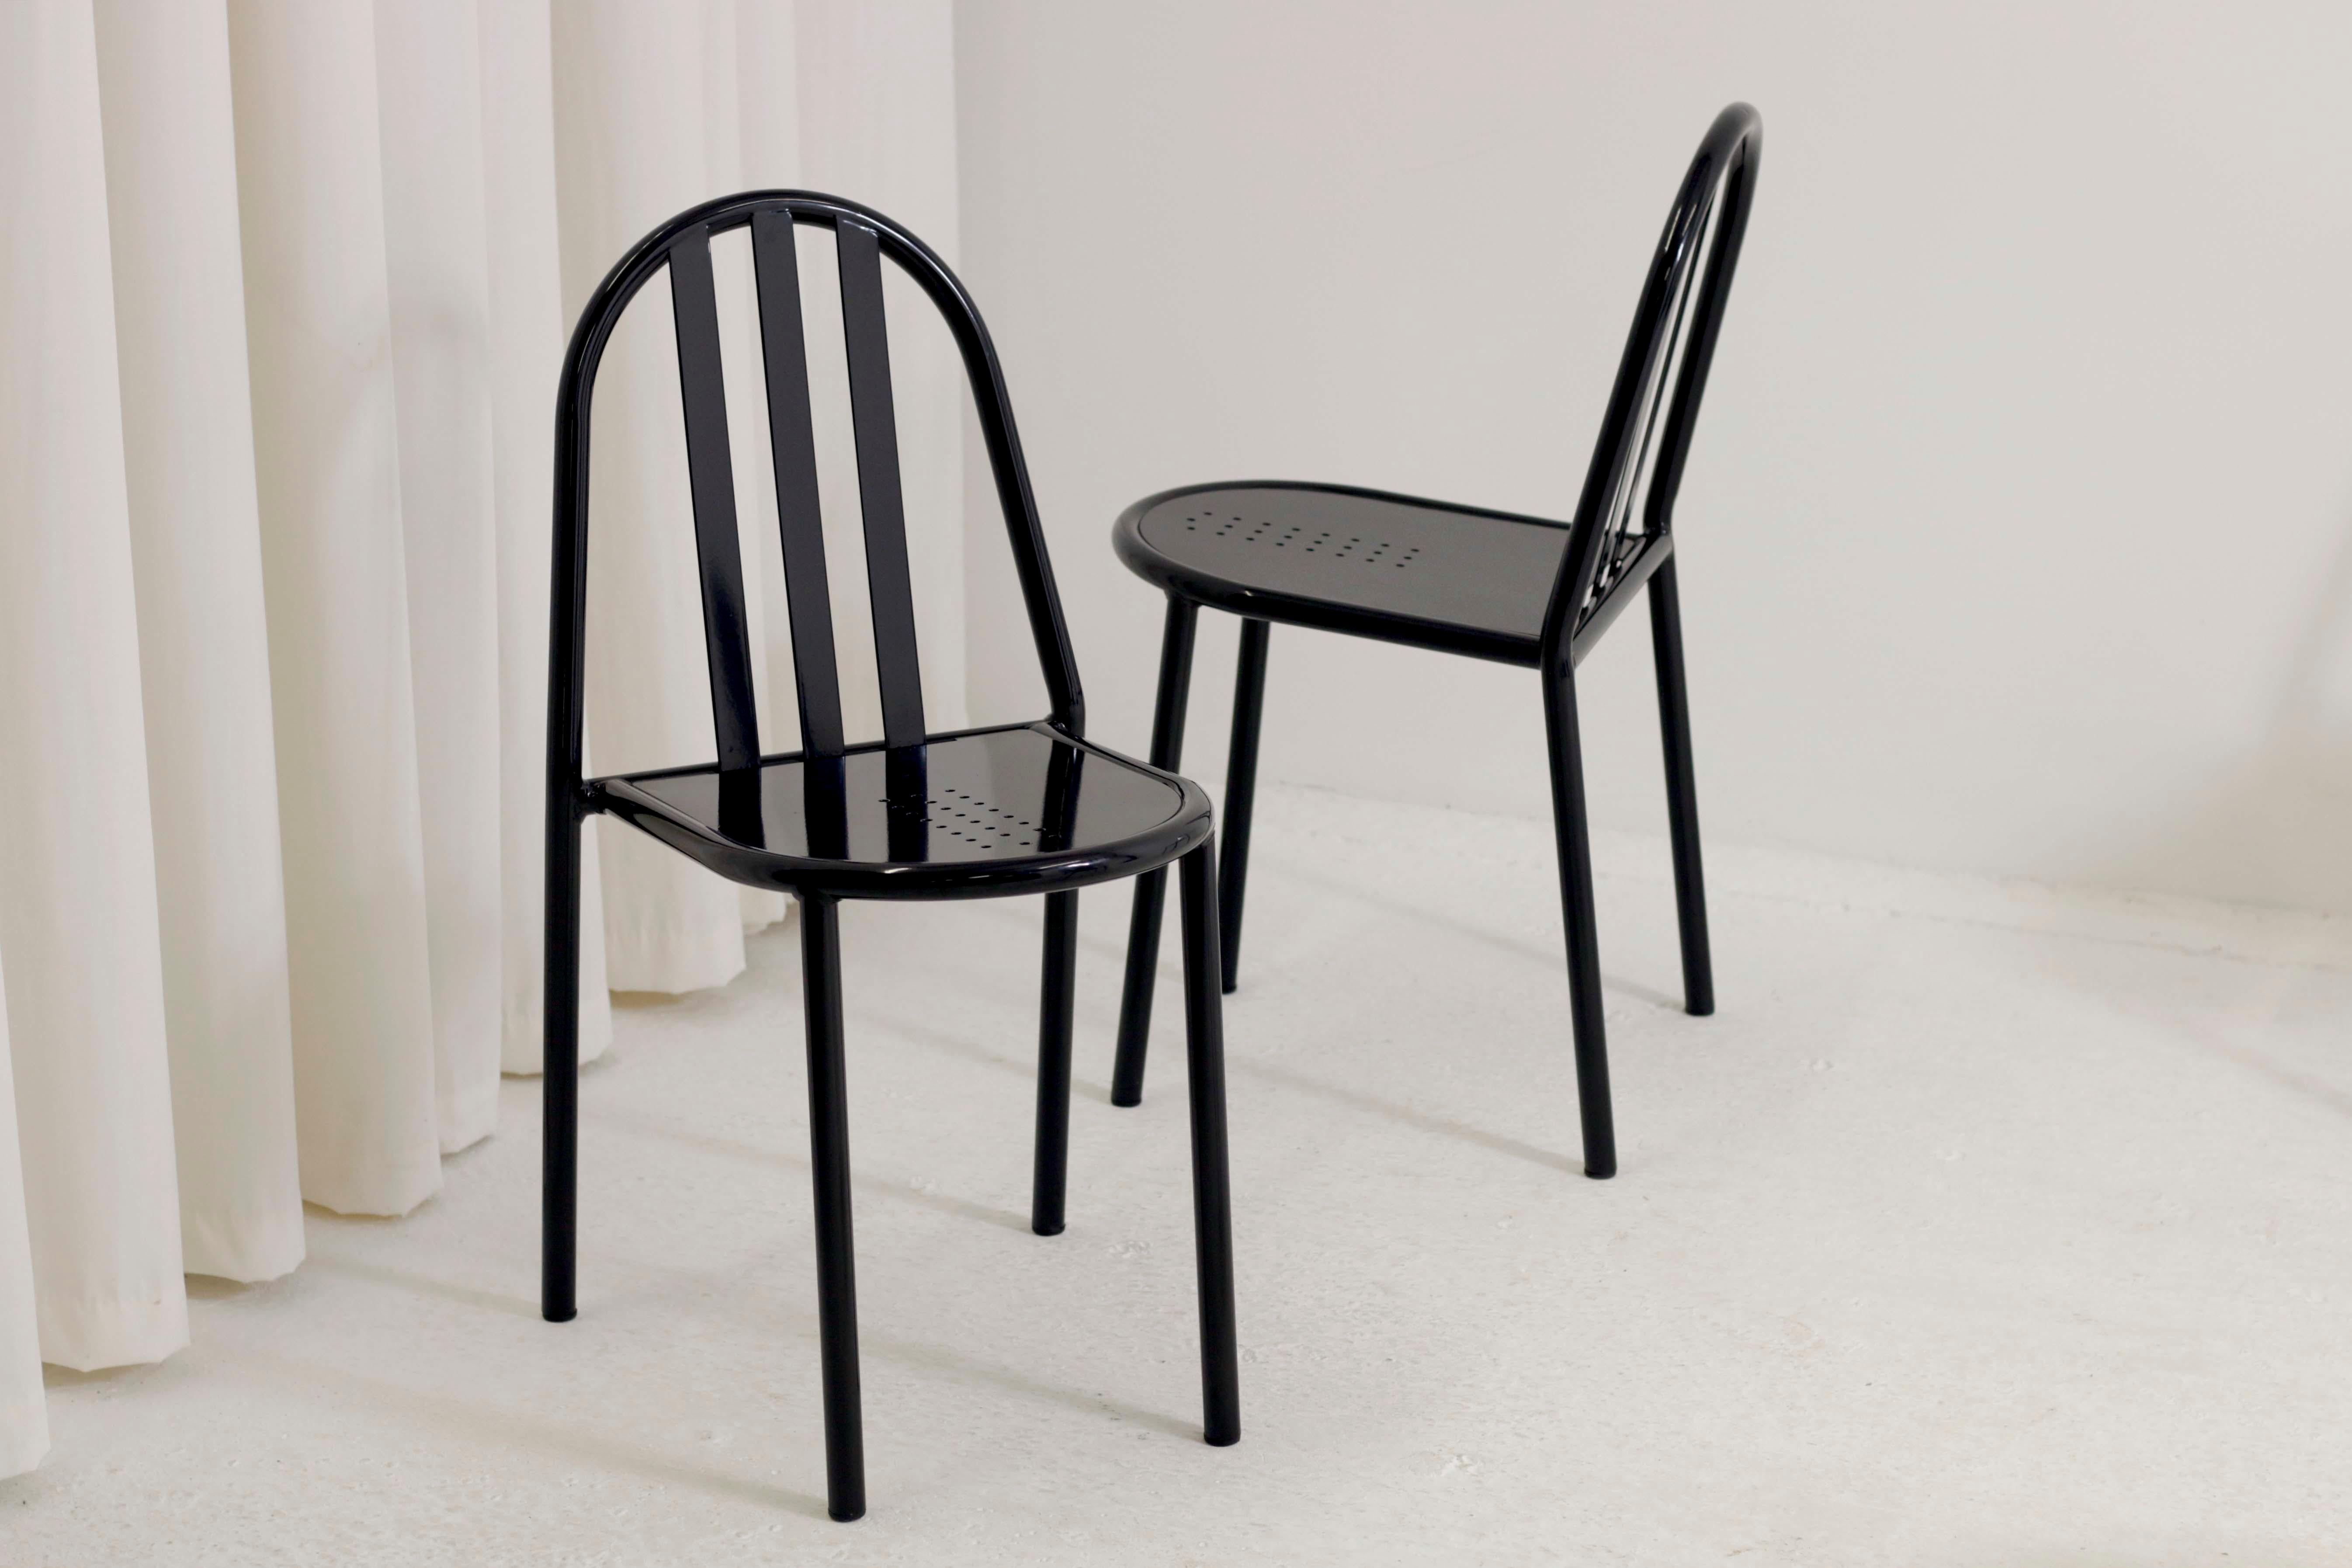 A set of 4 newly restored No.222 stacking chairs by Robert Mallet Stevens. Lacquered black metal in excellent condition with new rubber pads under the legs.

Dimensions: W40cm D46cm H81cm SH46cm.